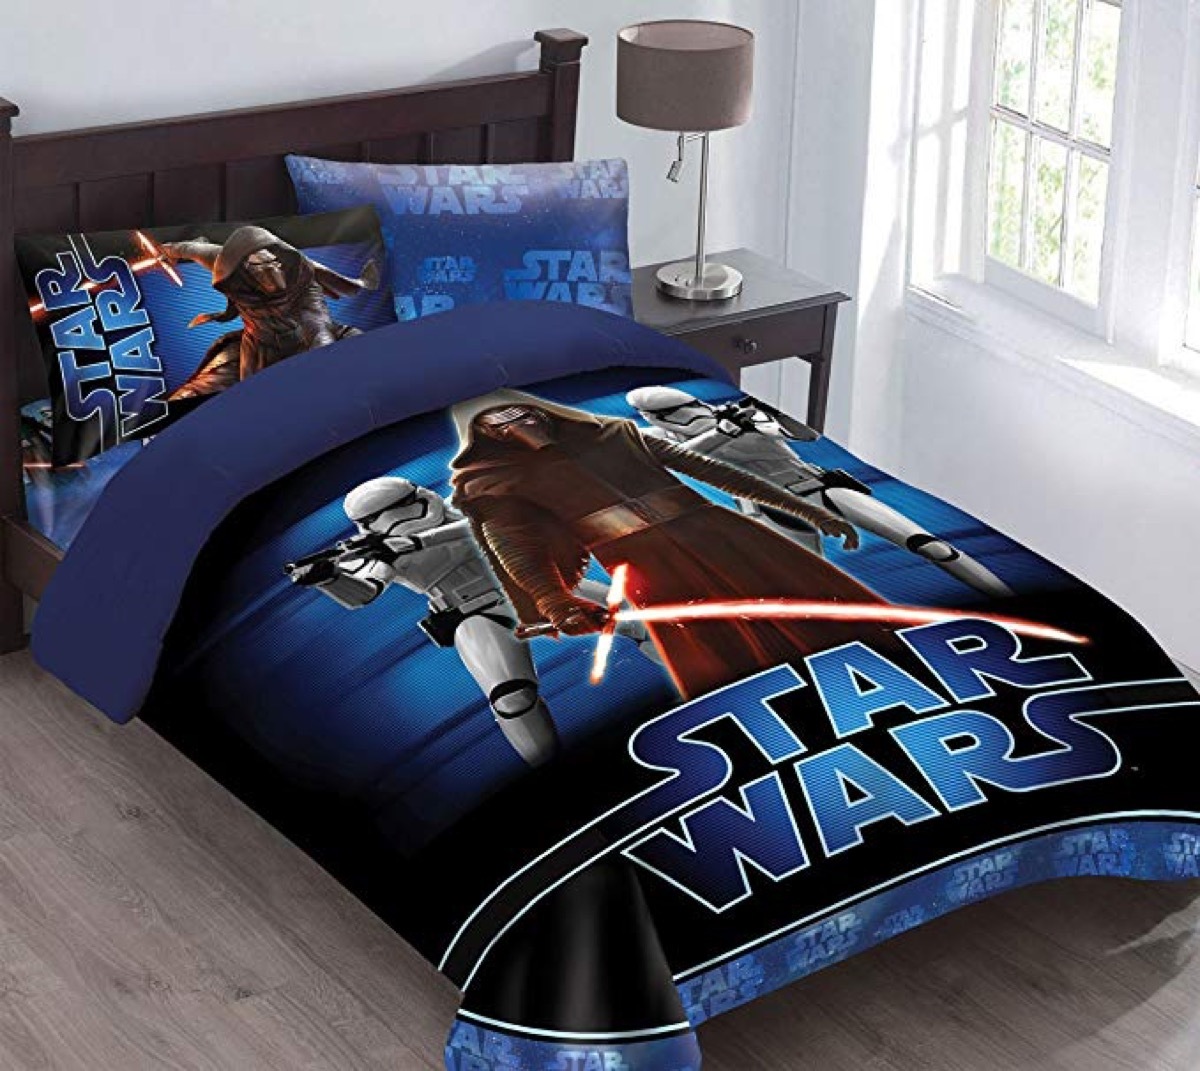 stars wars bed cover, no man over 40